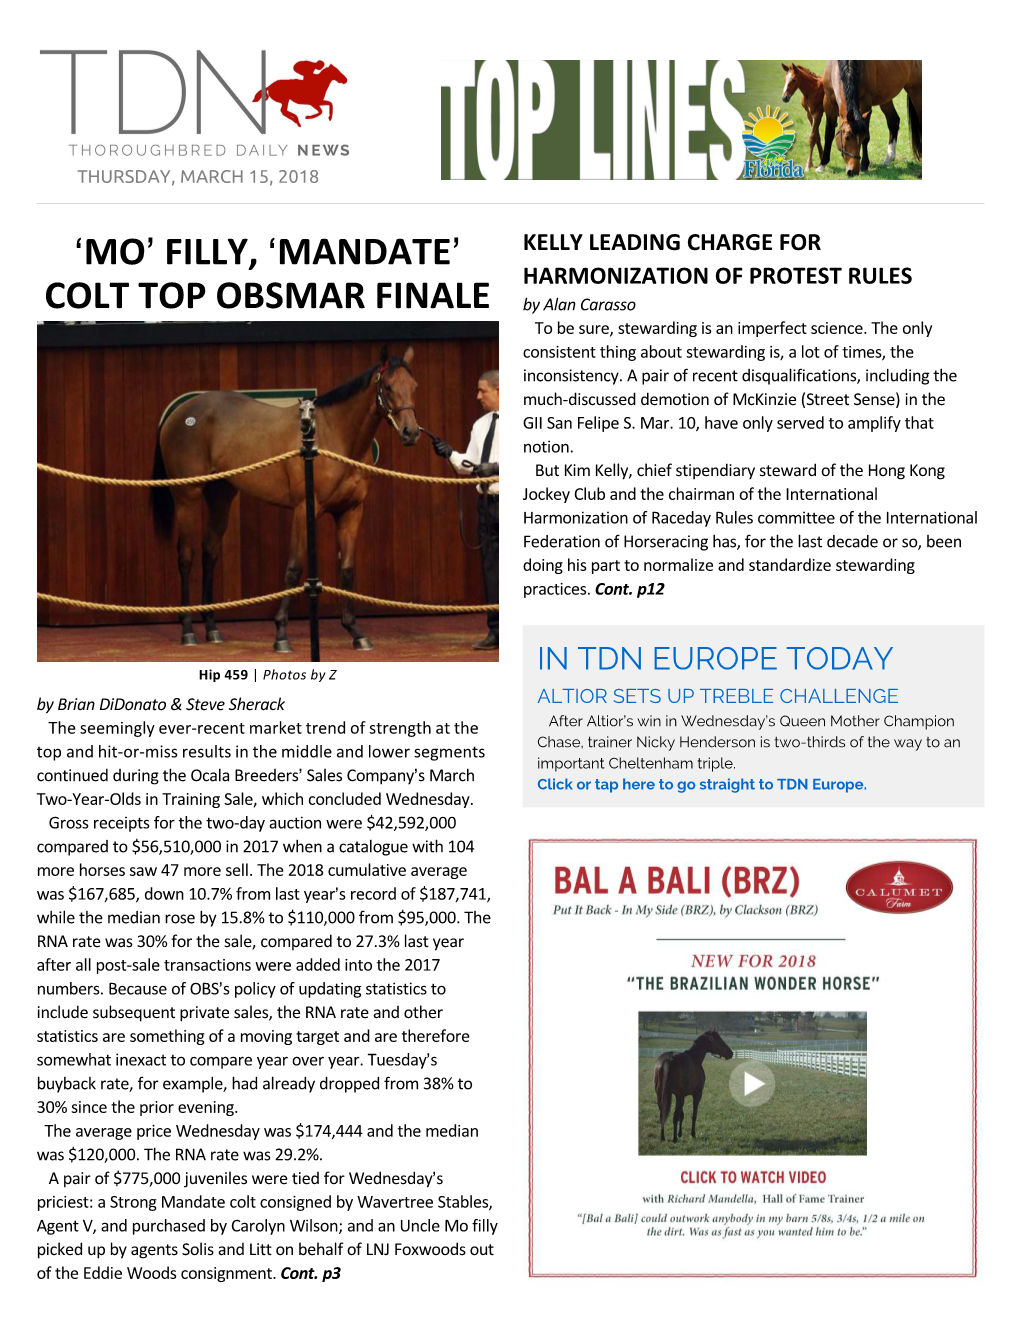 MO= FILLY, >MANDATE= KELLY LEADING CHARGE for HARMONIZATION of PROTEST RULES COLT TOP OBSMAR FINALE by Alan Carasso to Be Sure, Stewarding Is an Imperfect Science